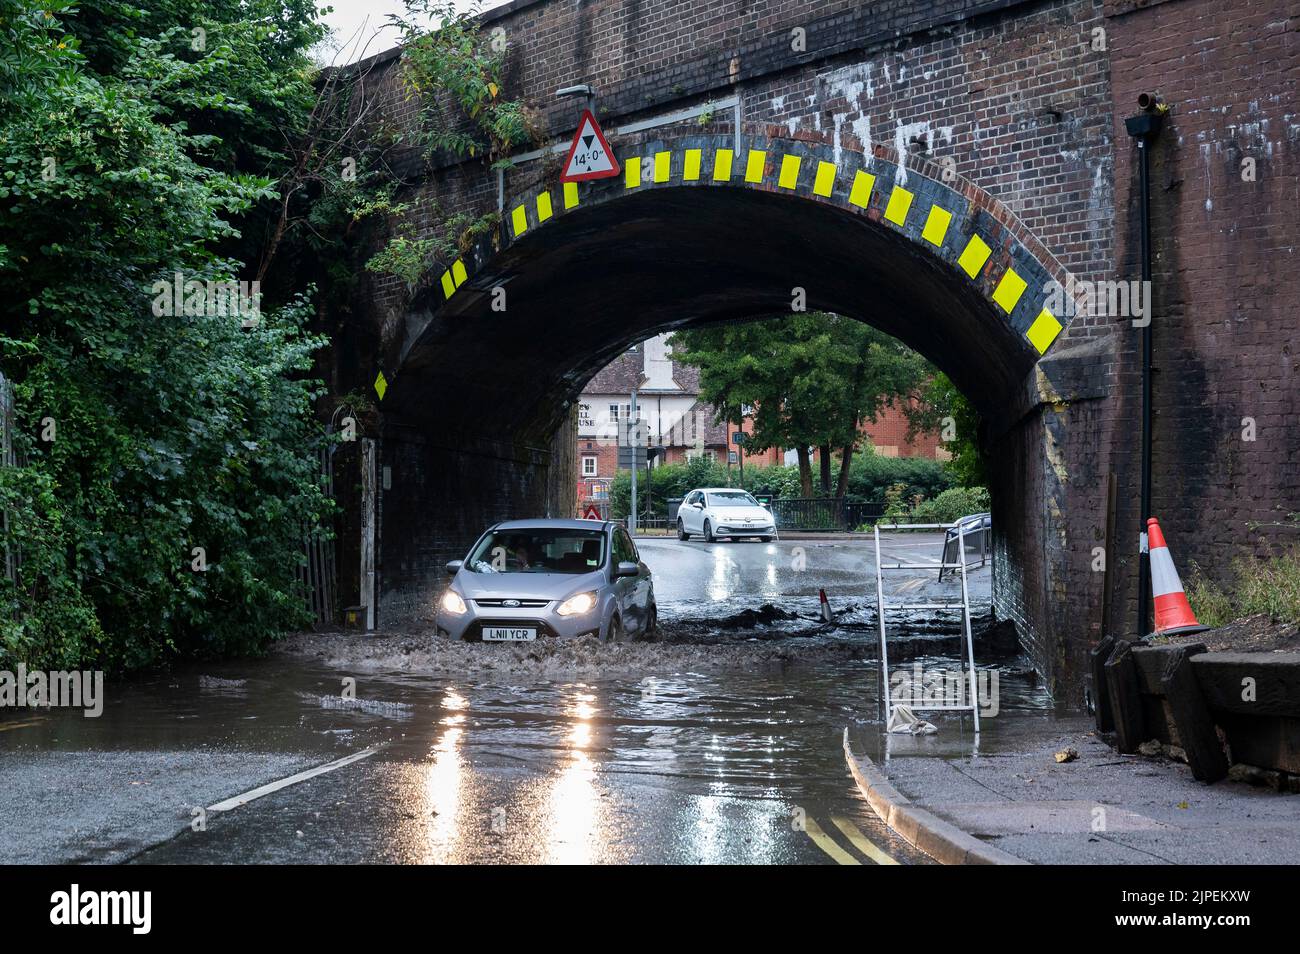 Haslemere, UK, Wednesday, 17th August 2022. A car drives under a railway bridge through a large flood after torrential rainfall brings the summer heatwave to an end, Weyhill, Haslemere, Surrey.  Credit: DavidJensen / Empics Entertainment / Alamy Live News Stock Photo